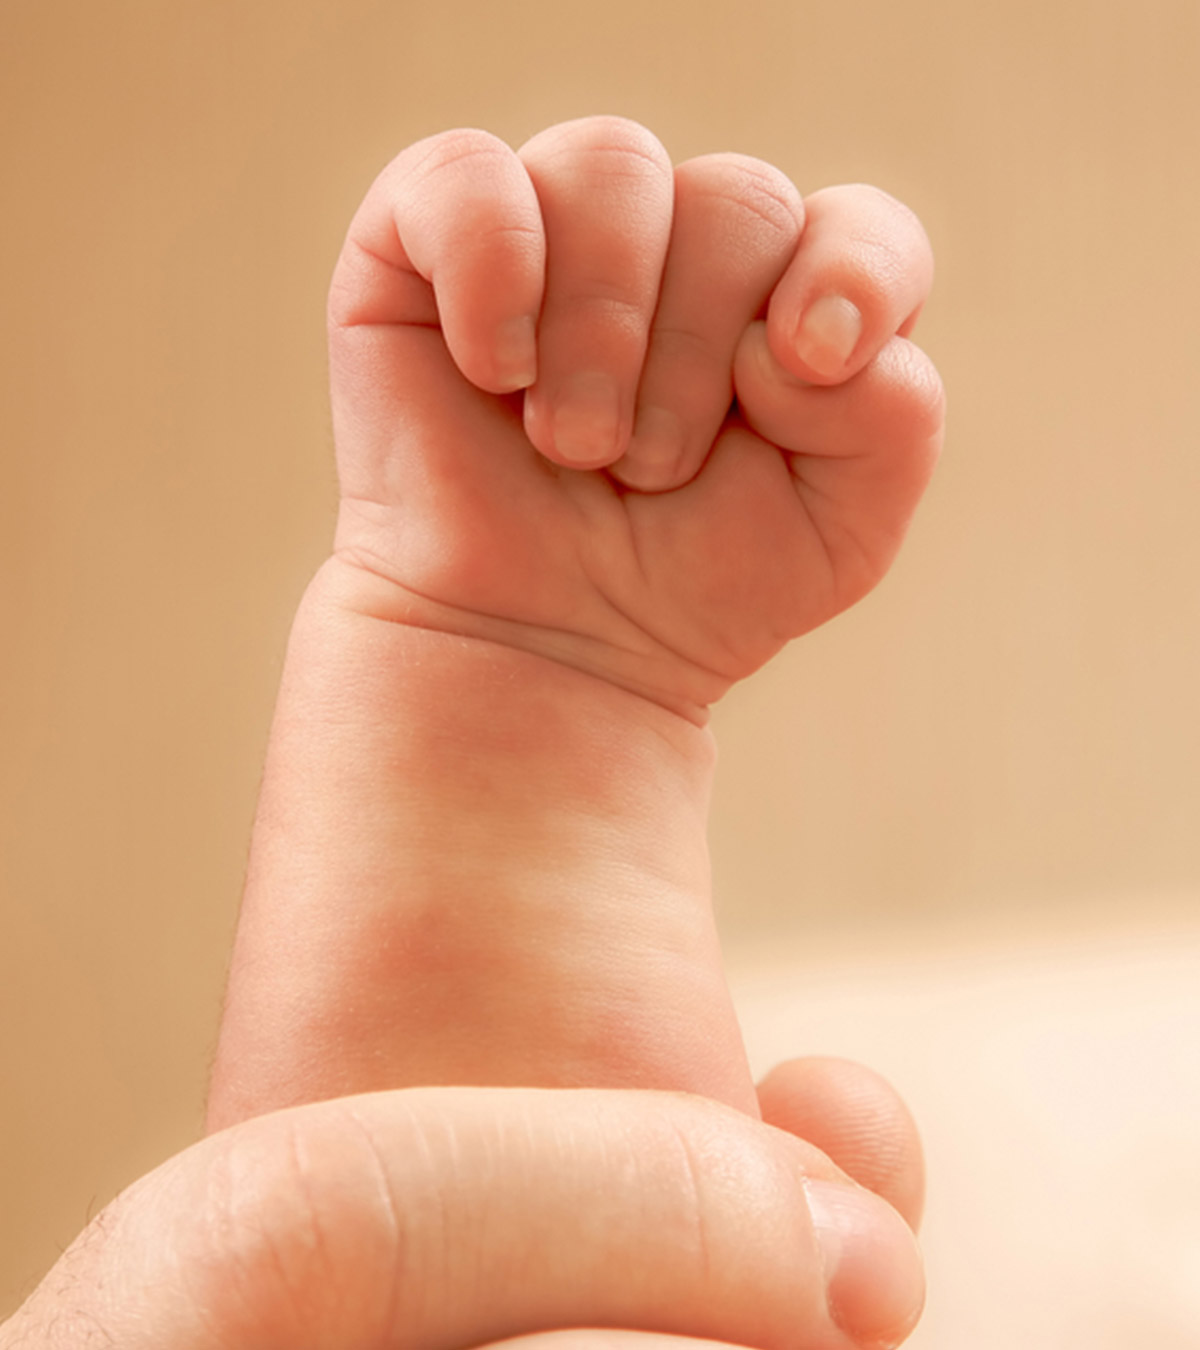 Why Do Babies Clench Their Fists And When Do They Unclench?